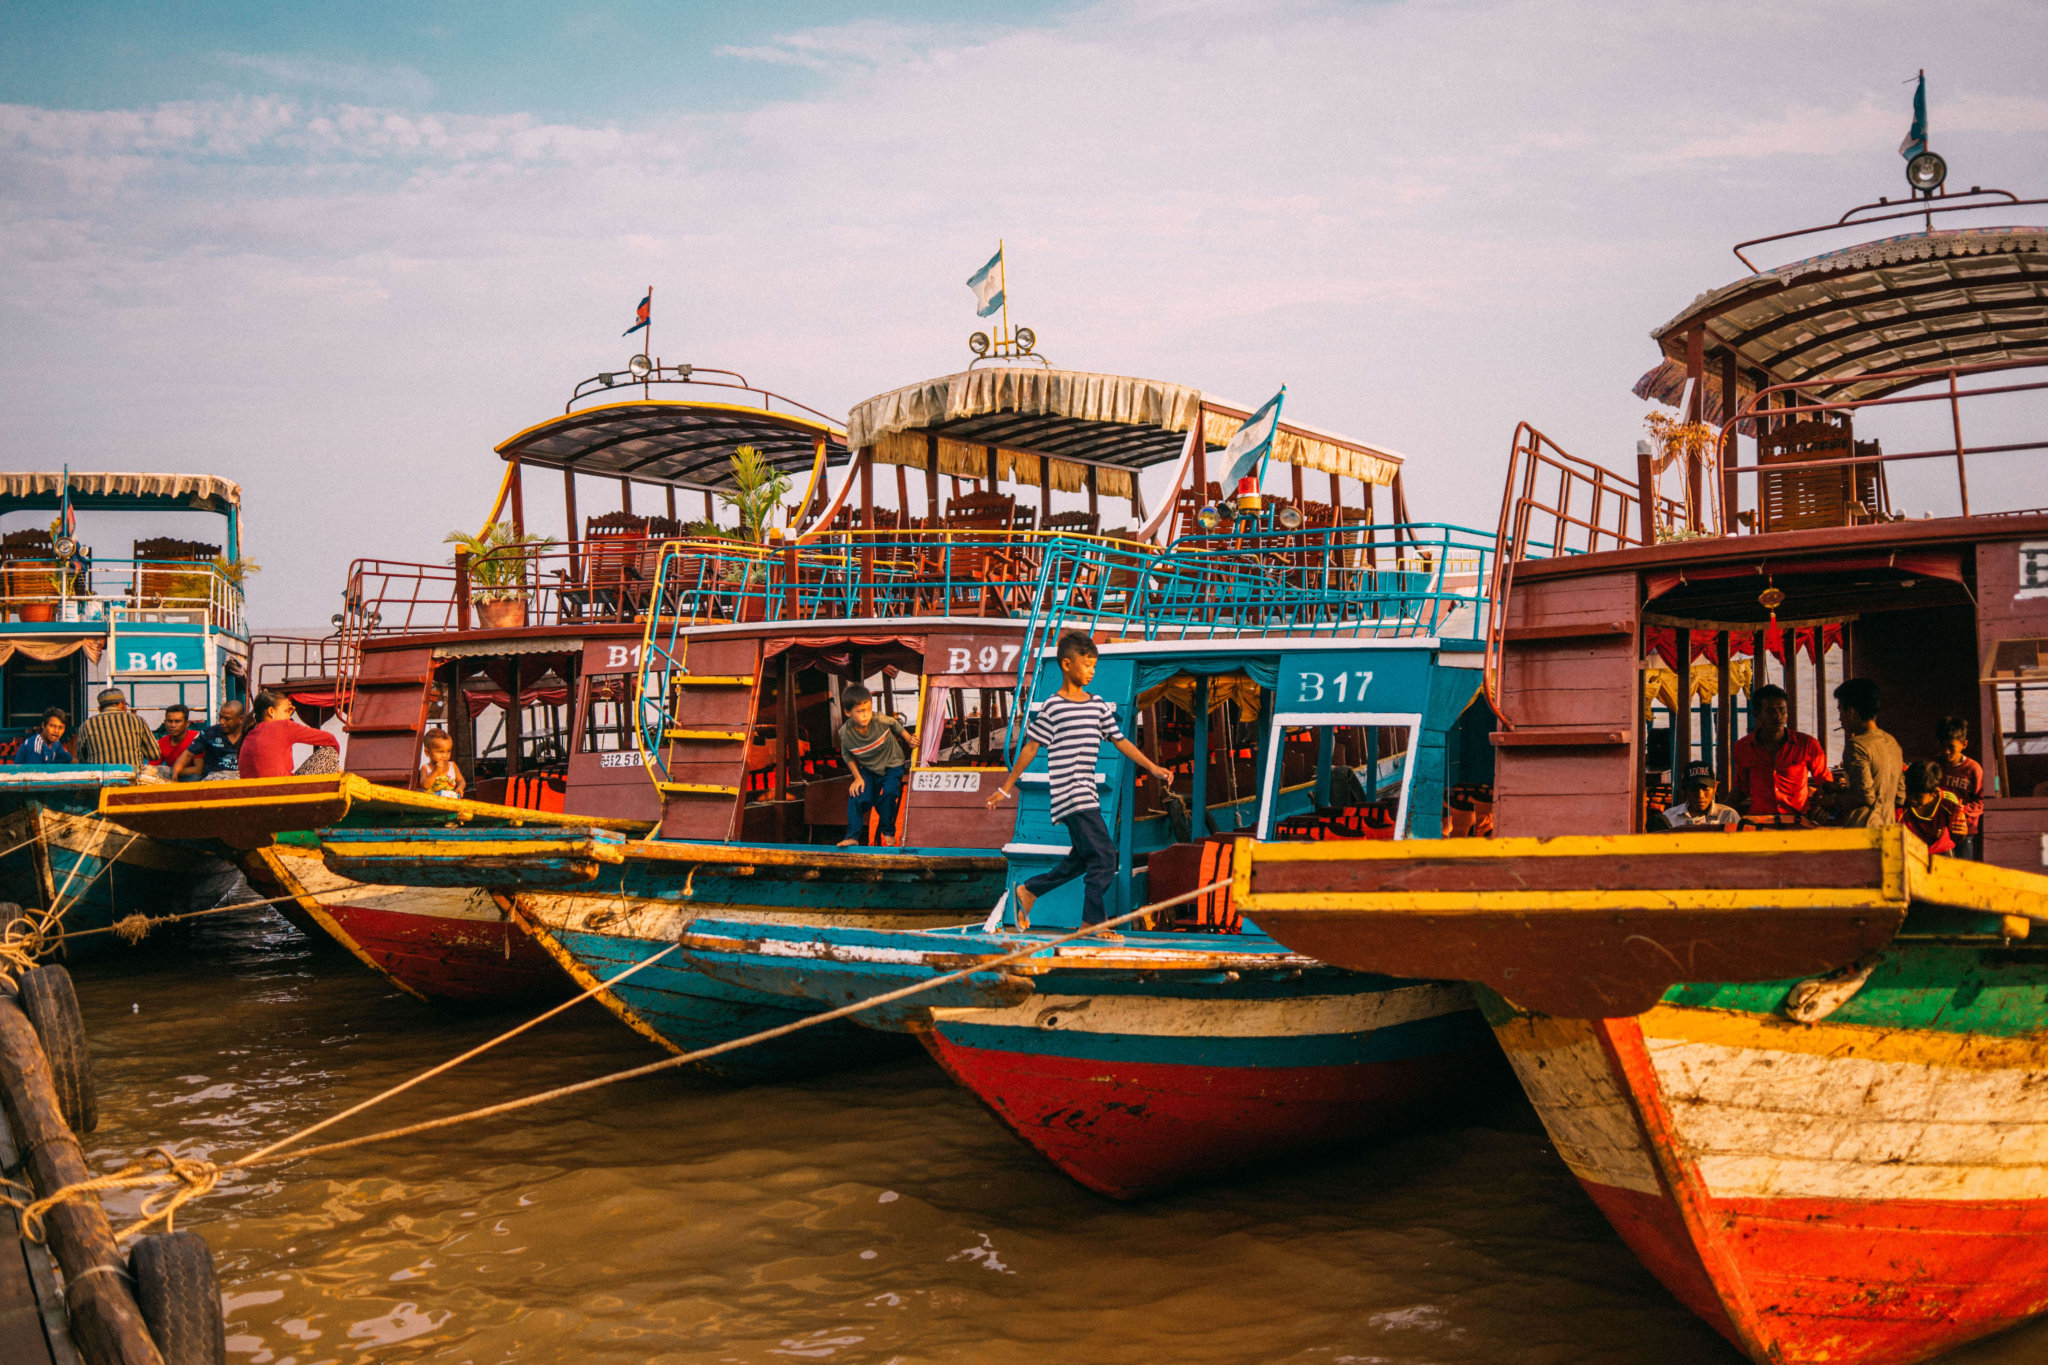 Floating Village of Chong Khneas, Chong Kneas, Floating Village, Siem Reap, Tonle Sap Lake, Cambodia, floating houses, house boat, southeast asia